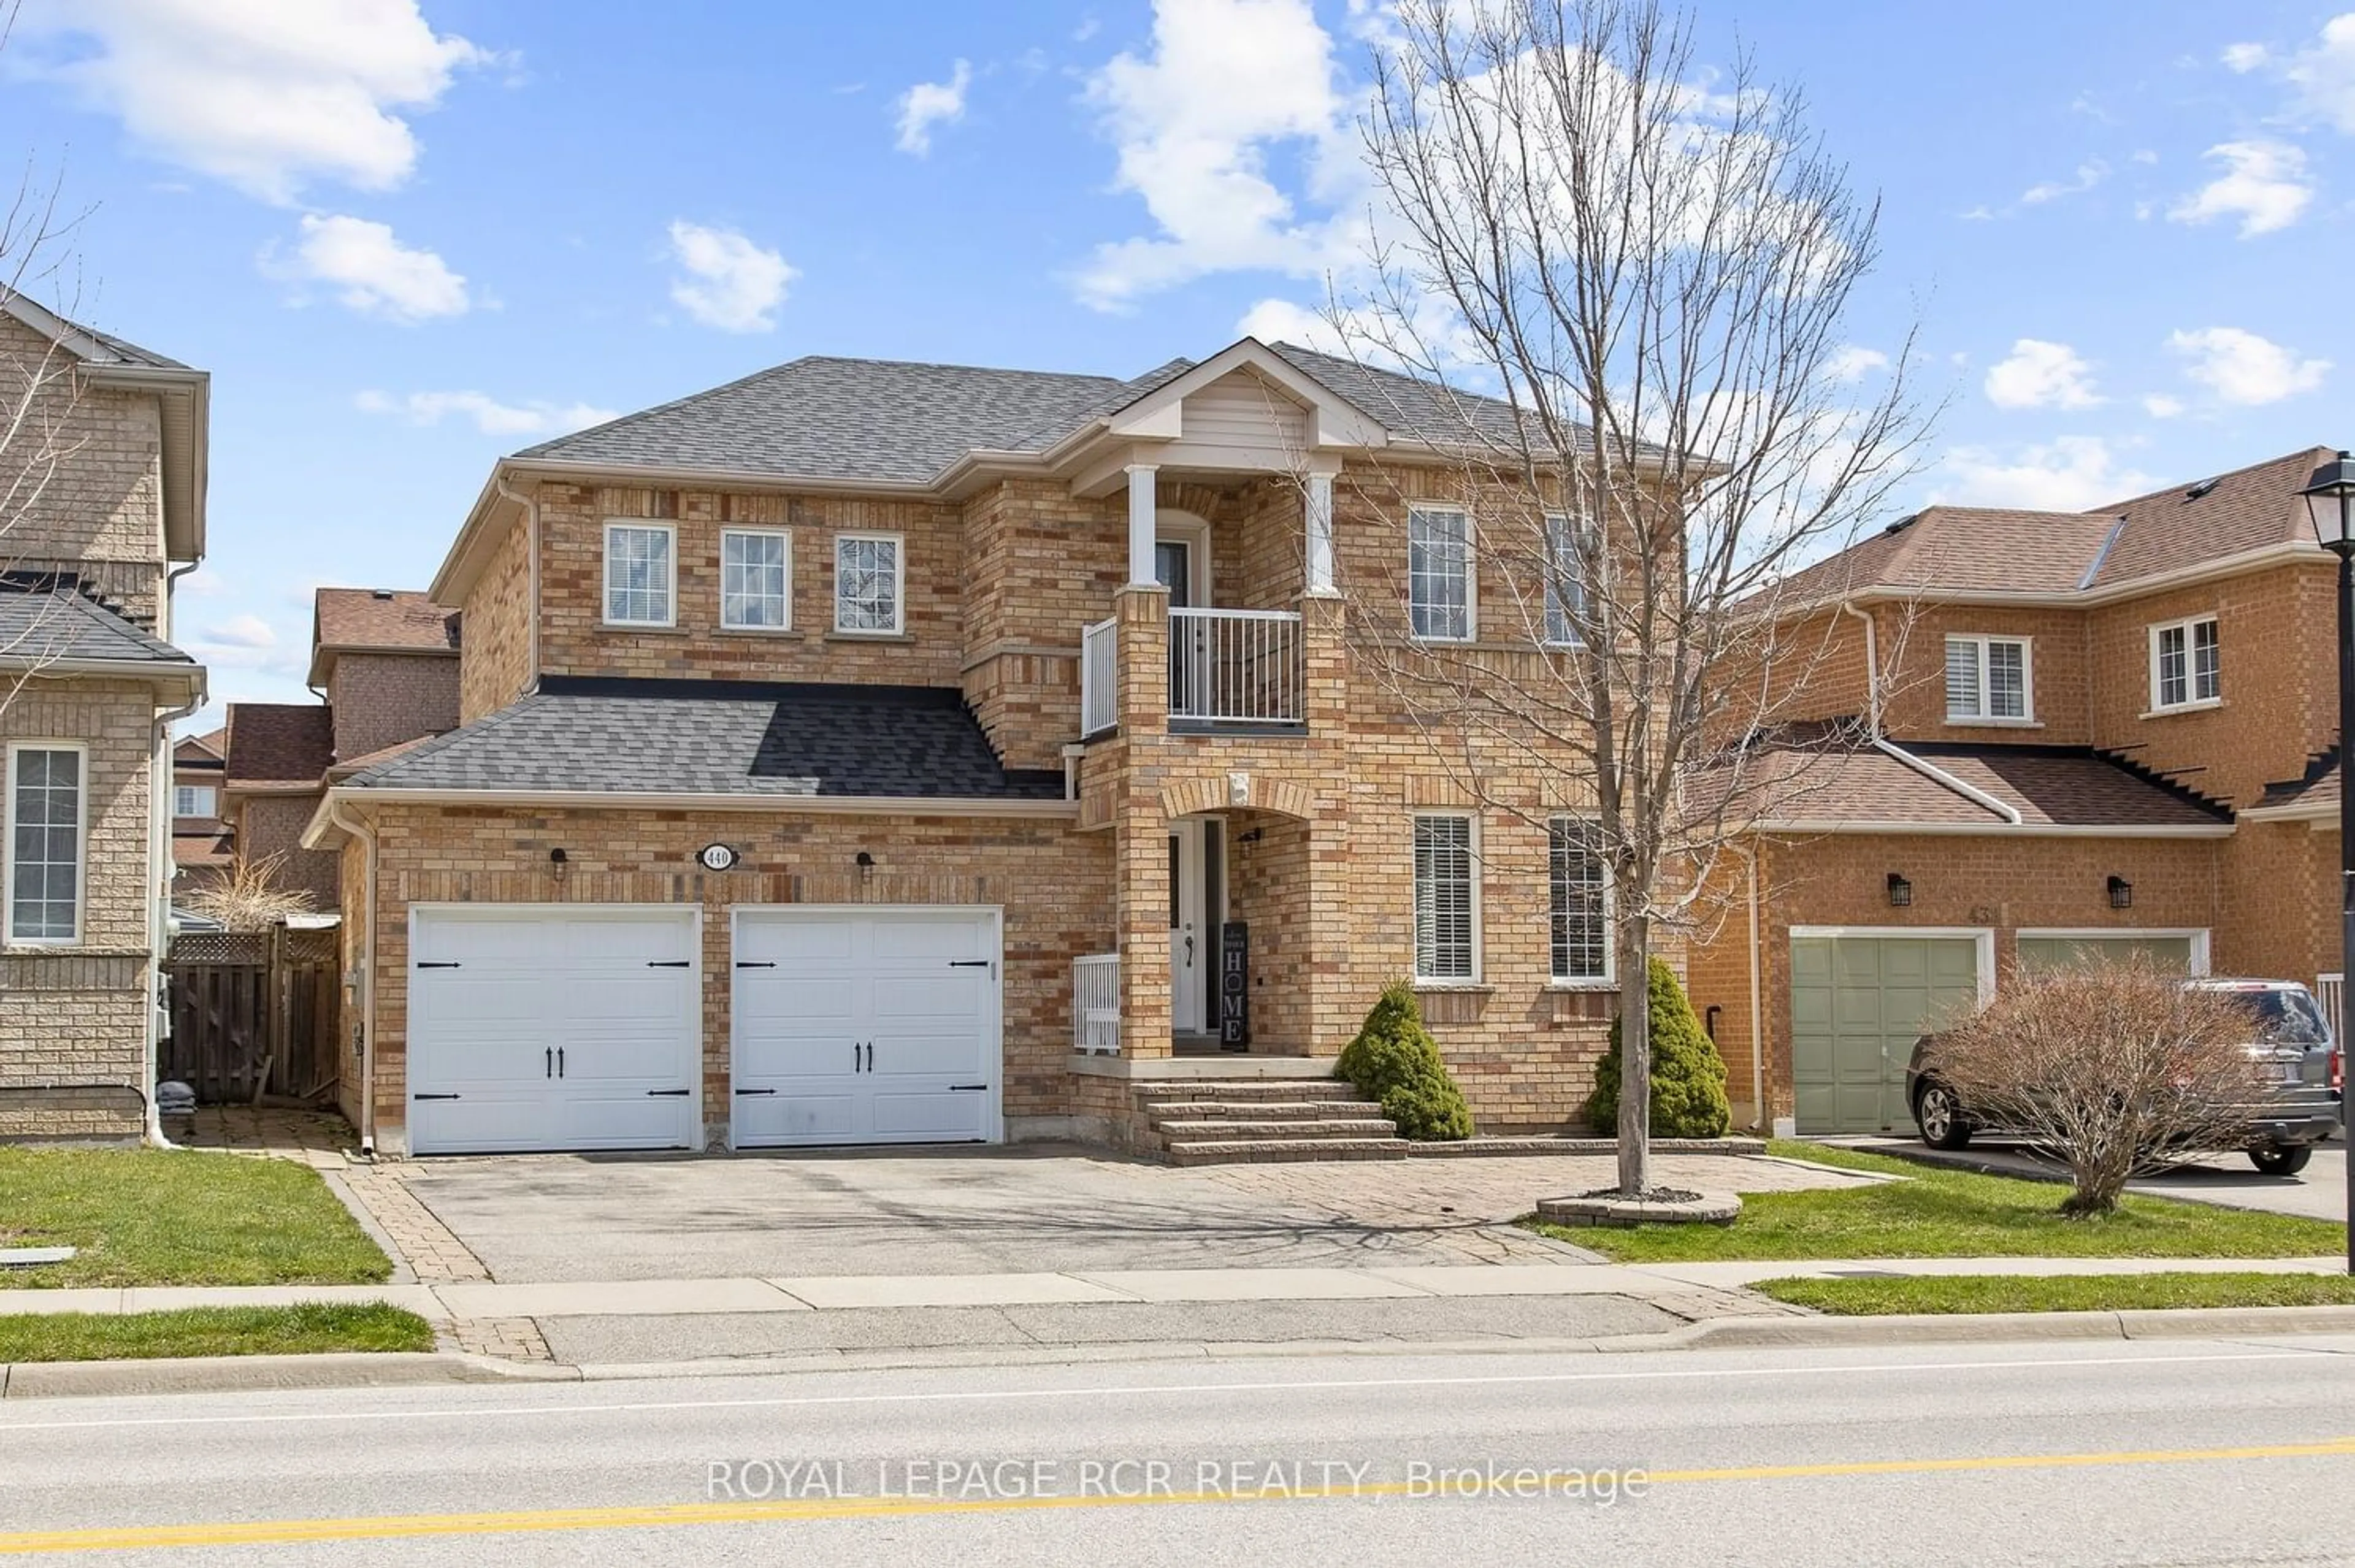 Home with brick exterior material for 440 Woodspring Ave, Newmarket Ontario L3X 2X1